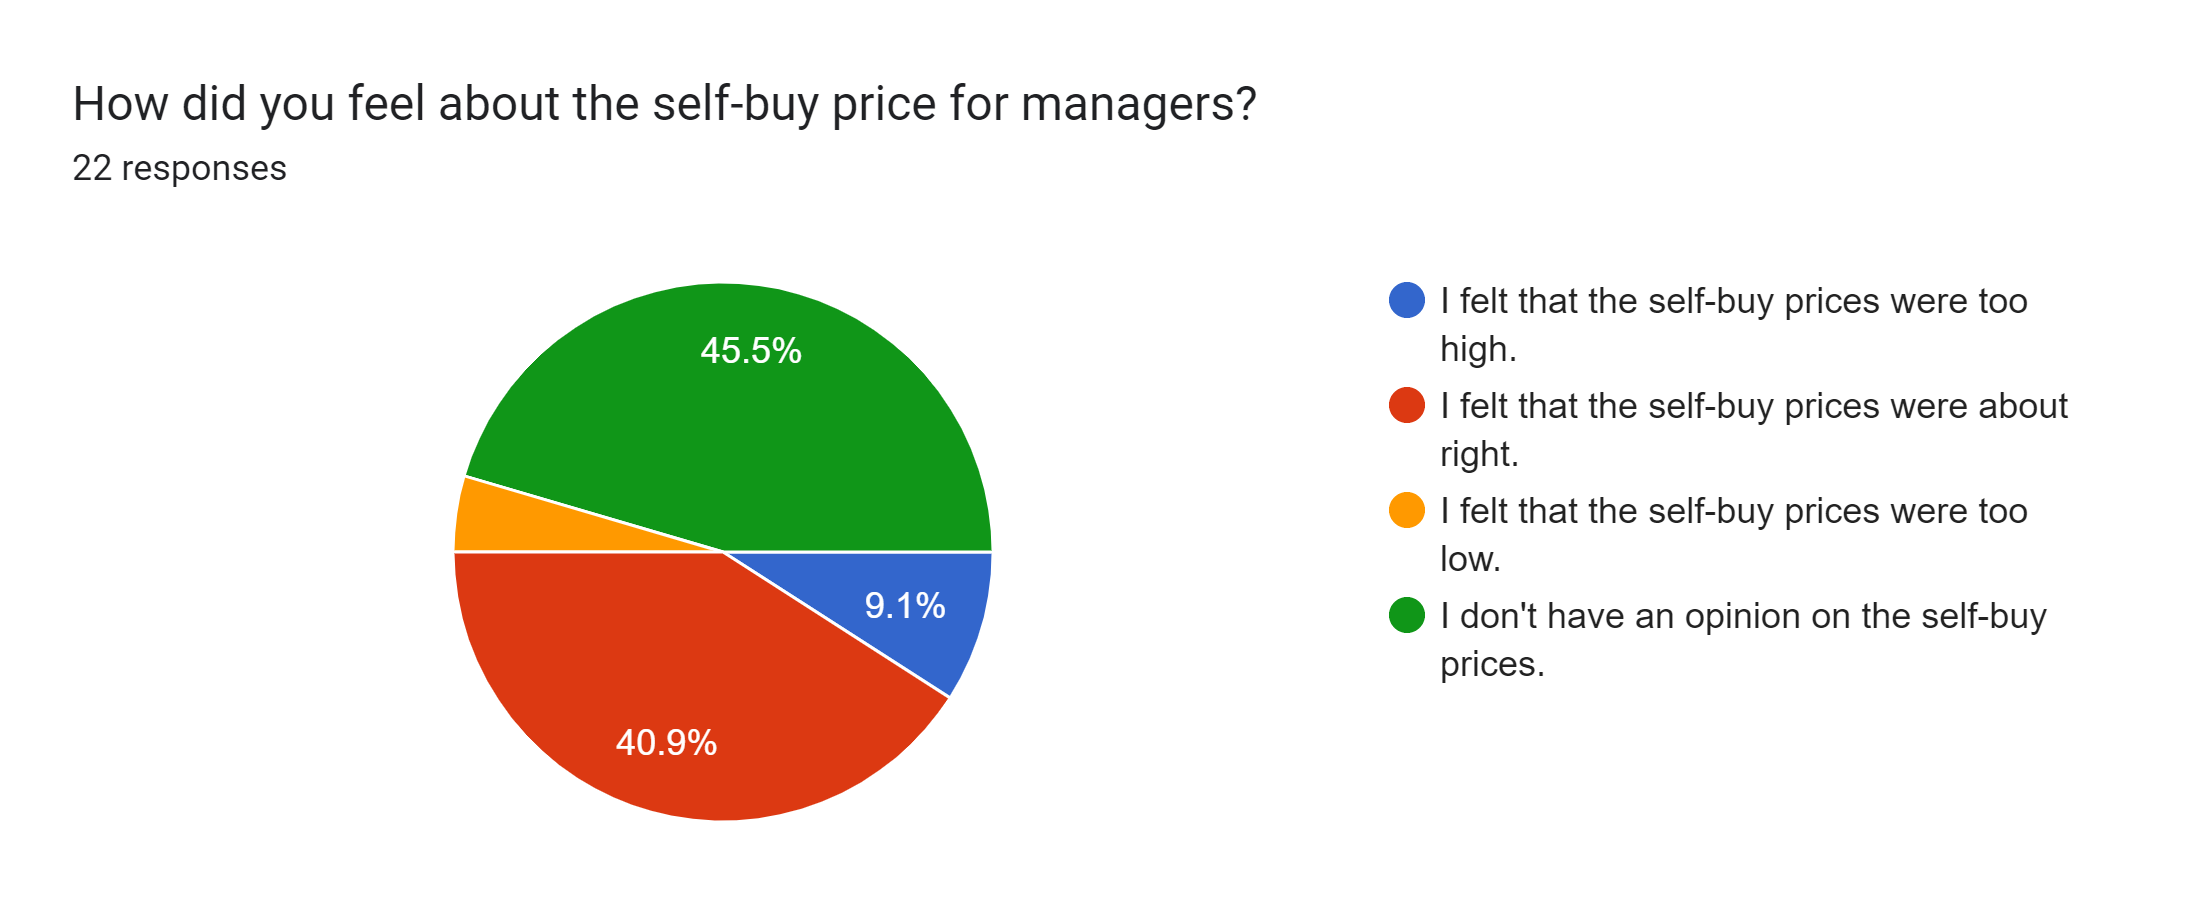 Forms response chart. Question title: How did you feel about the self-buy price for managers?. Number of responses: 22 responses.